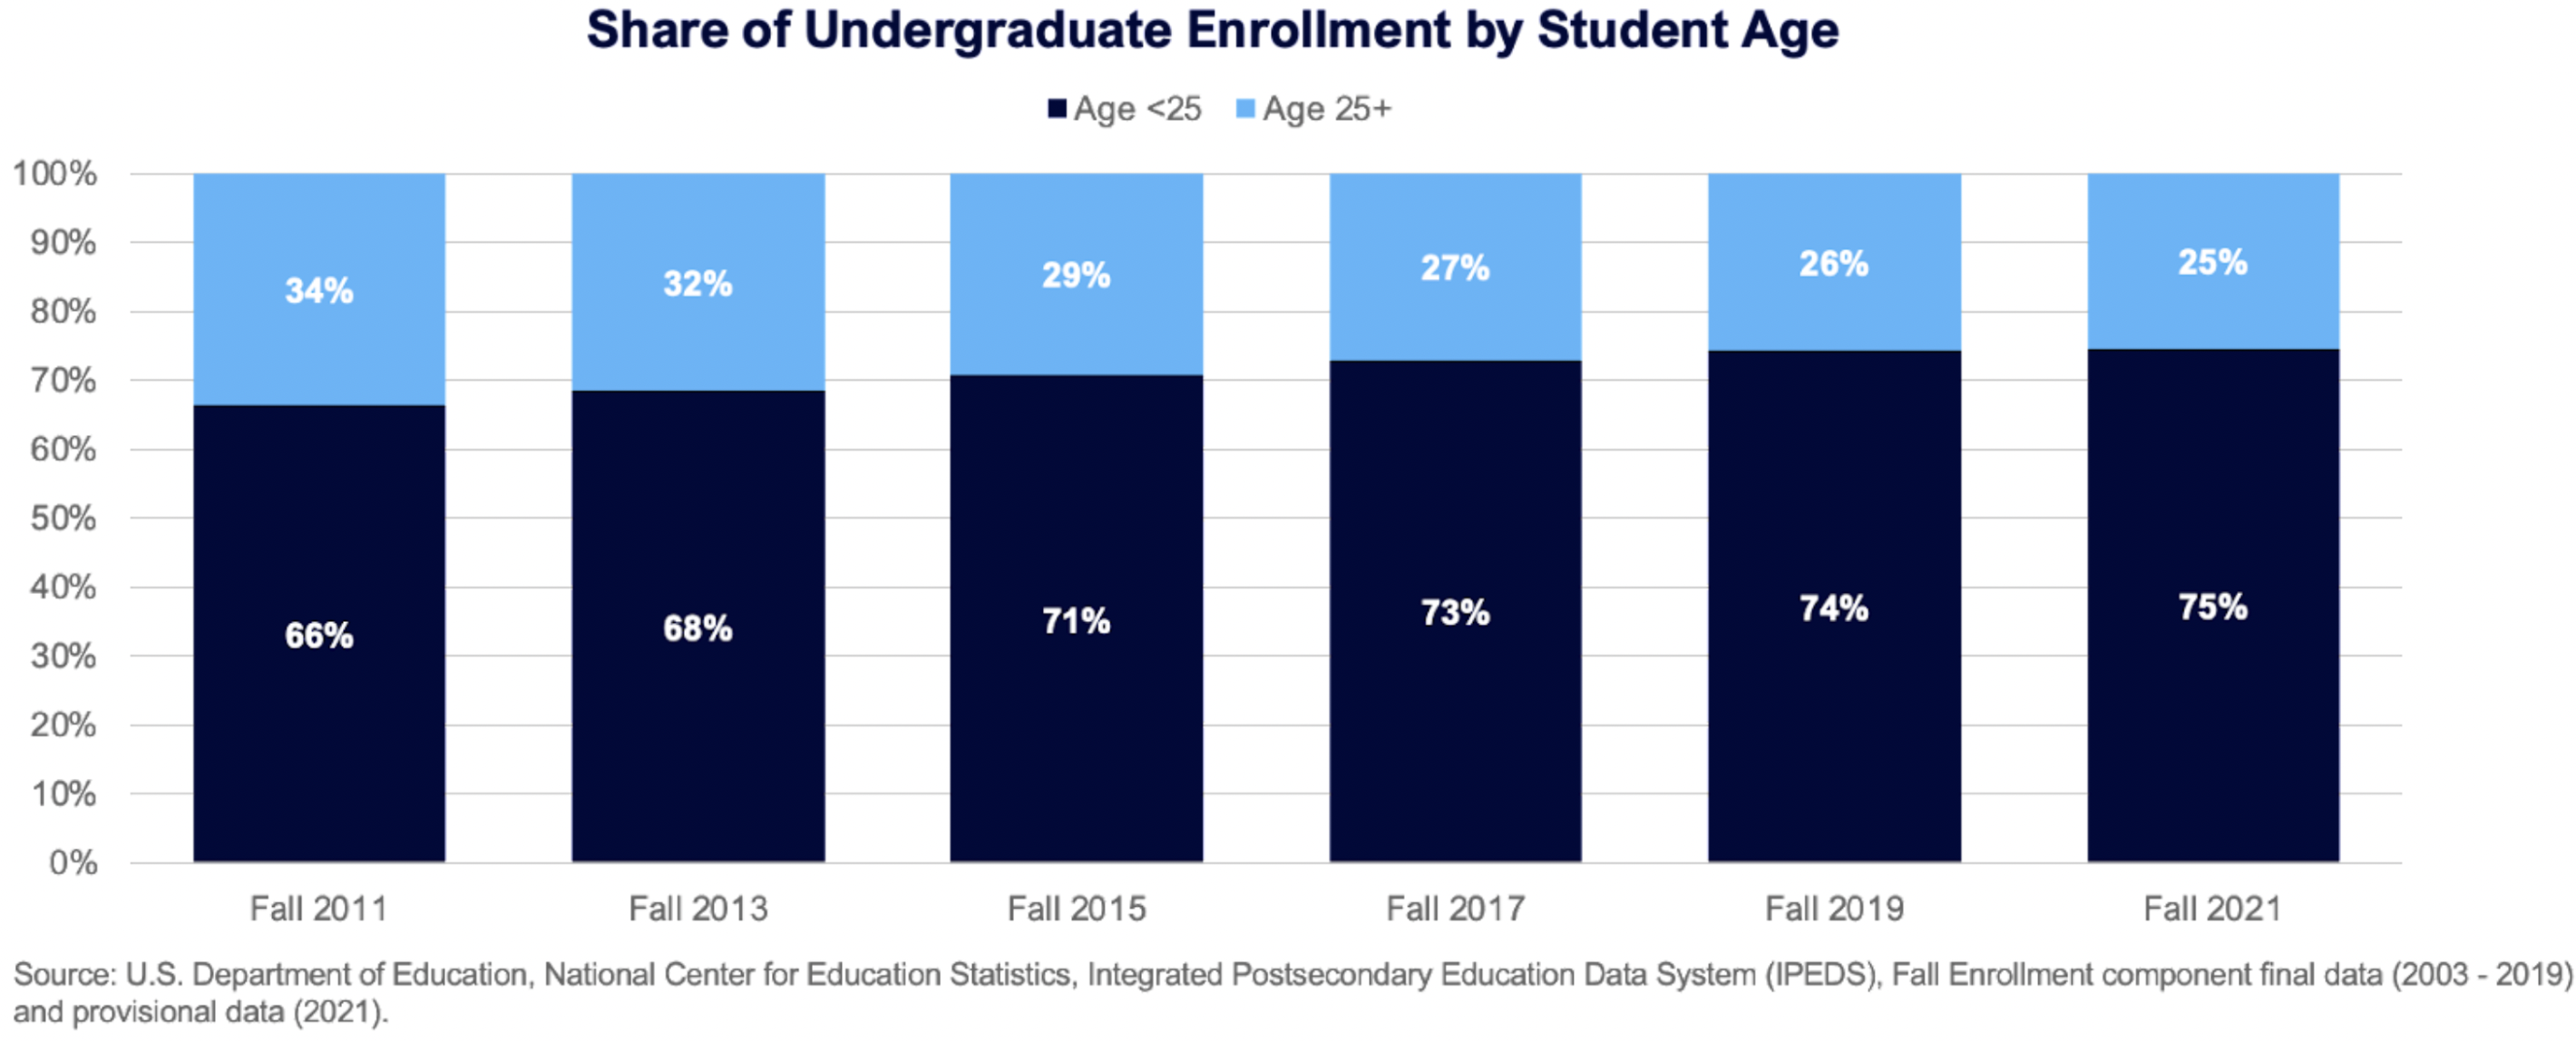 Share of Undergraduate Enrollment by Student Age 